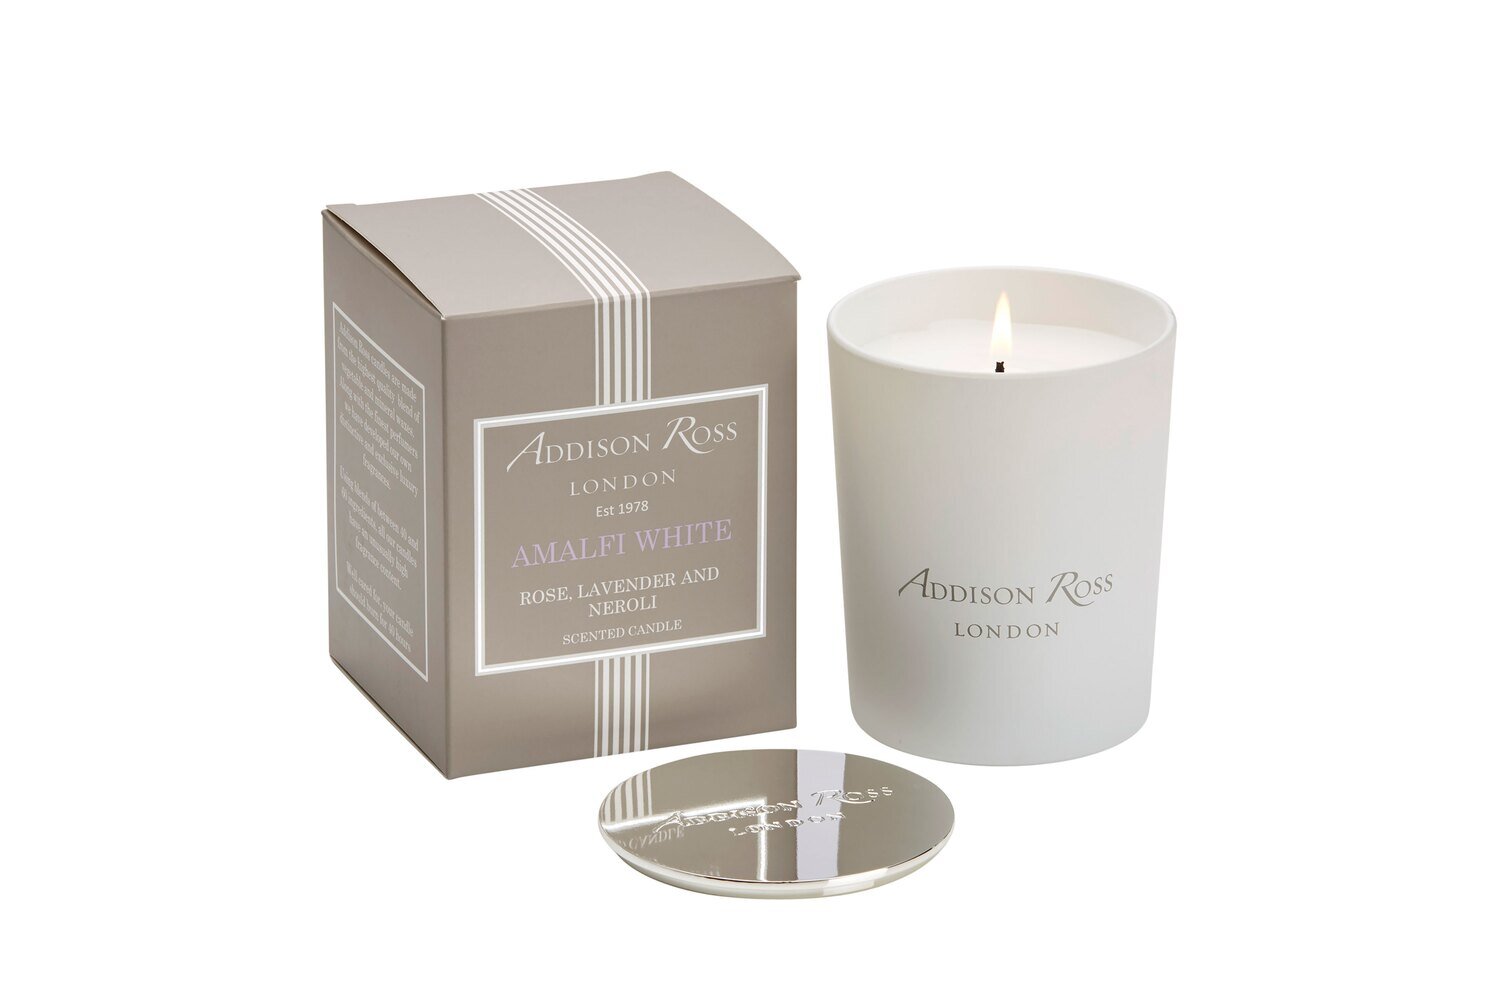 Addison Ross Amalfi White Scented Candle 190g / 6.7oz Net Mineral & Vegetable Wax CA0104